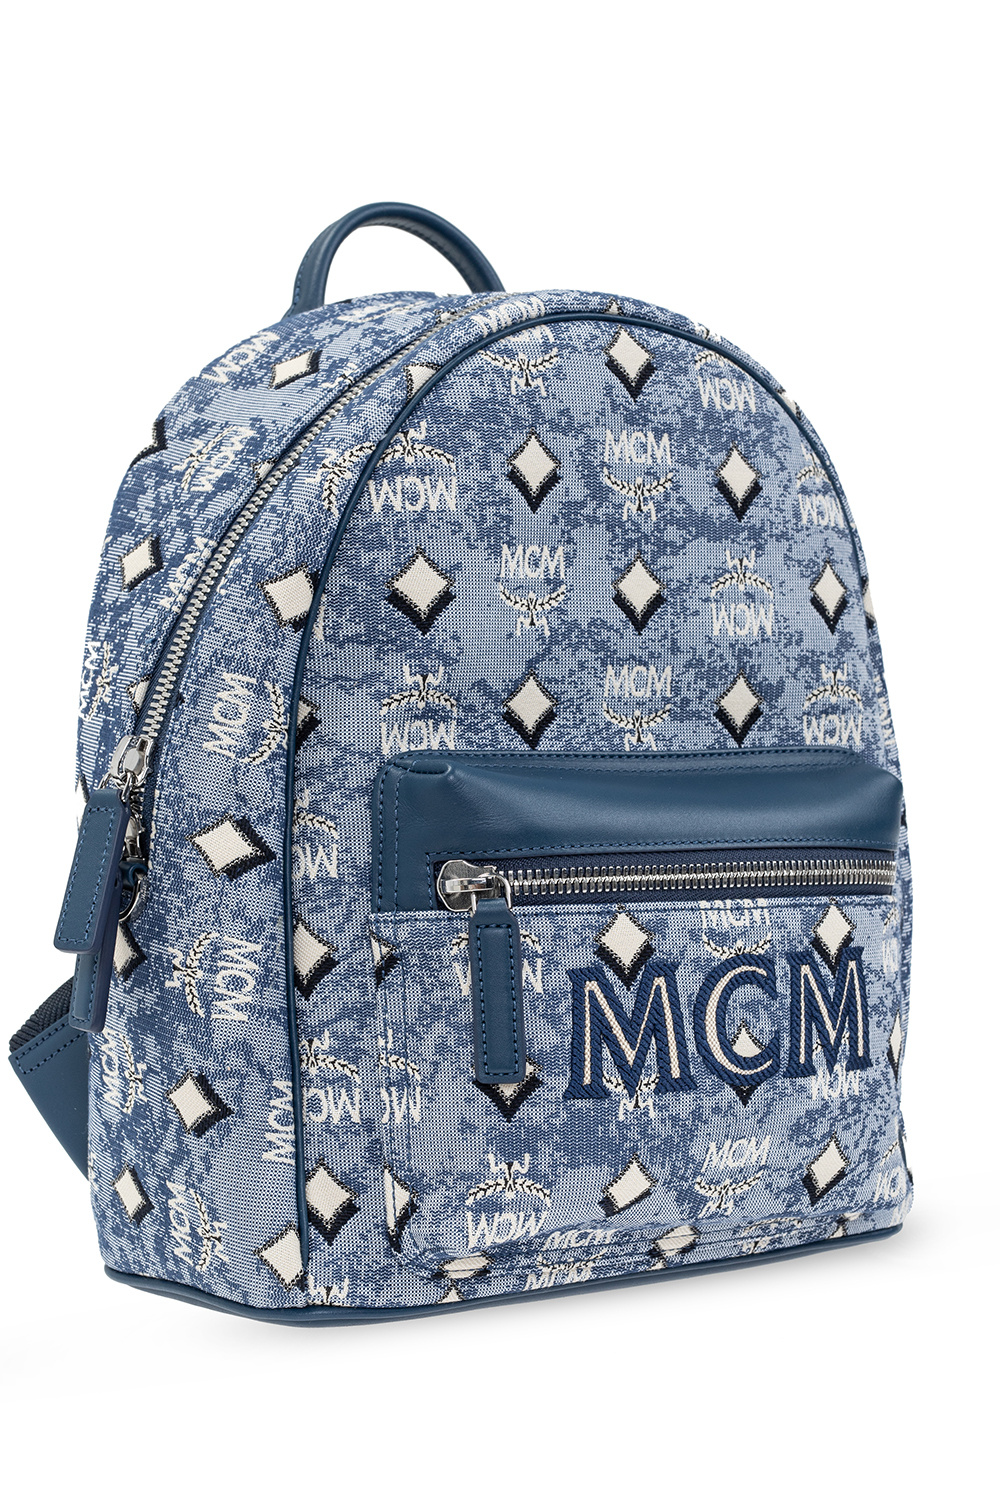 MCM product eng 1028173 Puma Deck Backpack